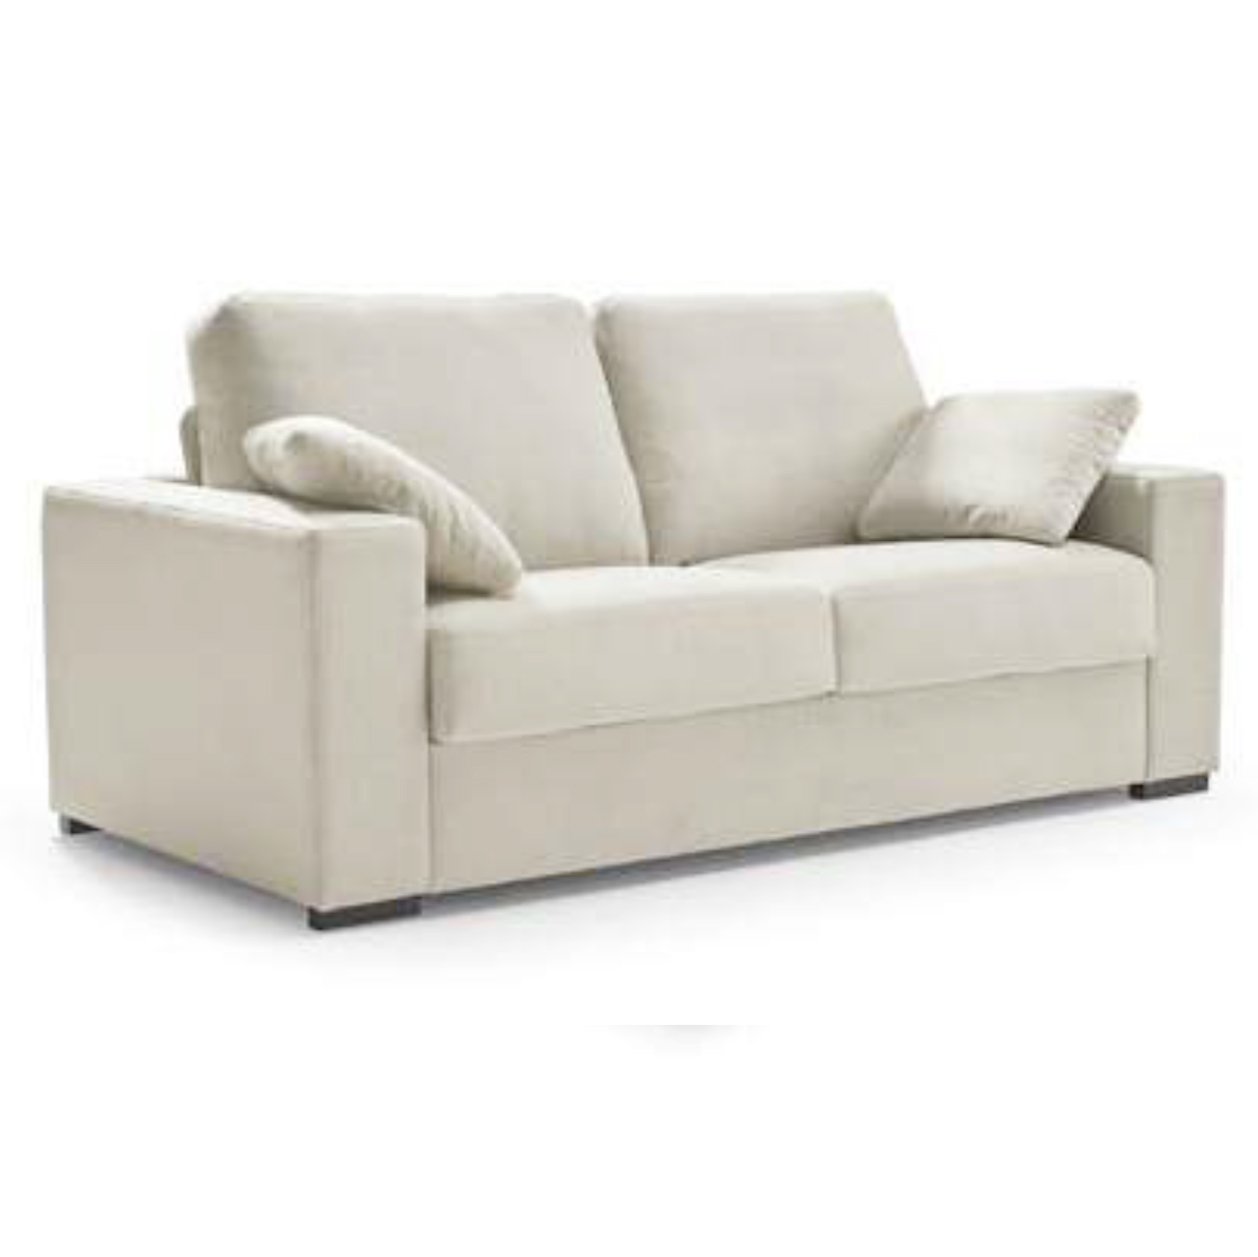 Oliveira's Bari Sofa Bed available to purchase